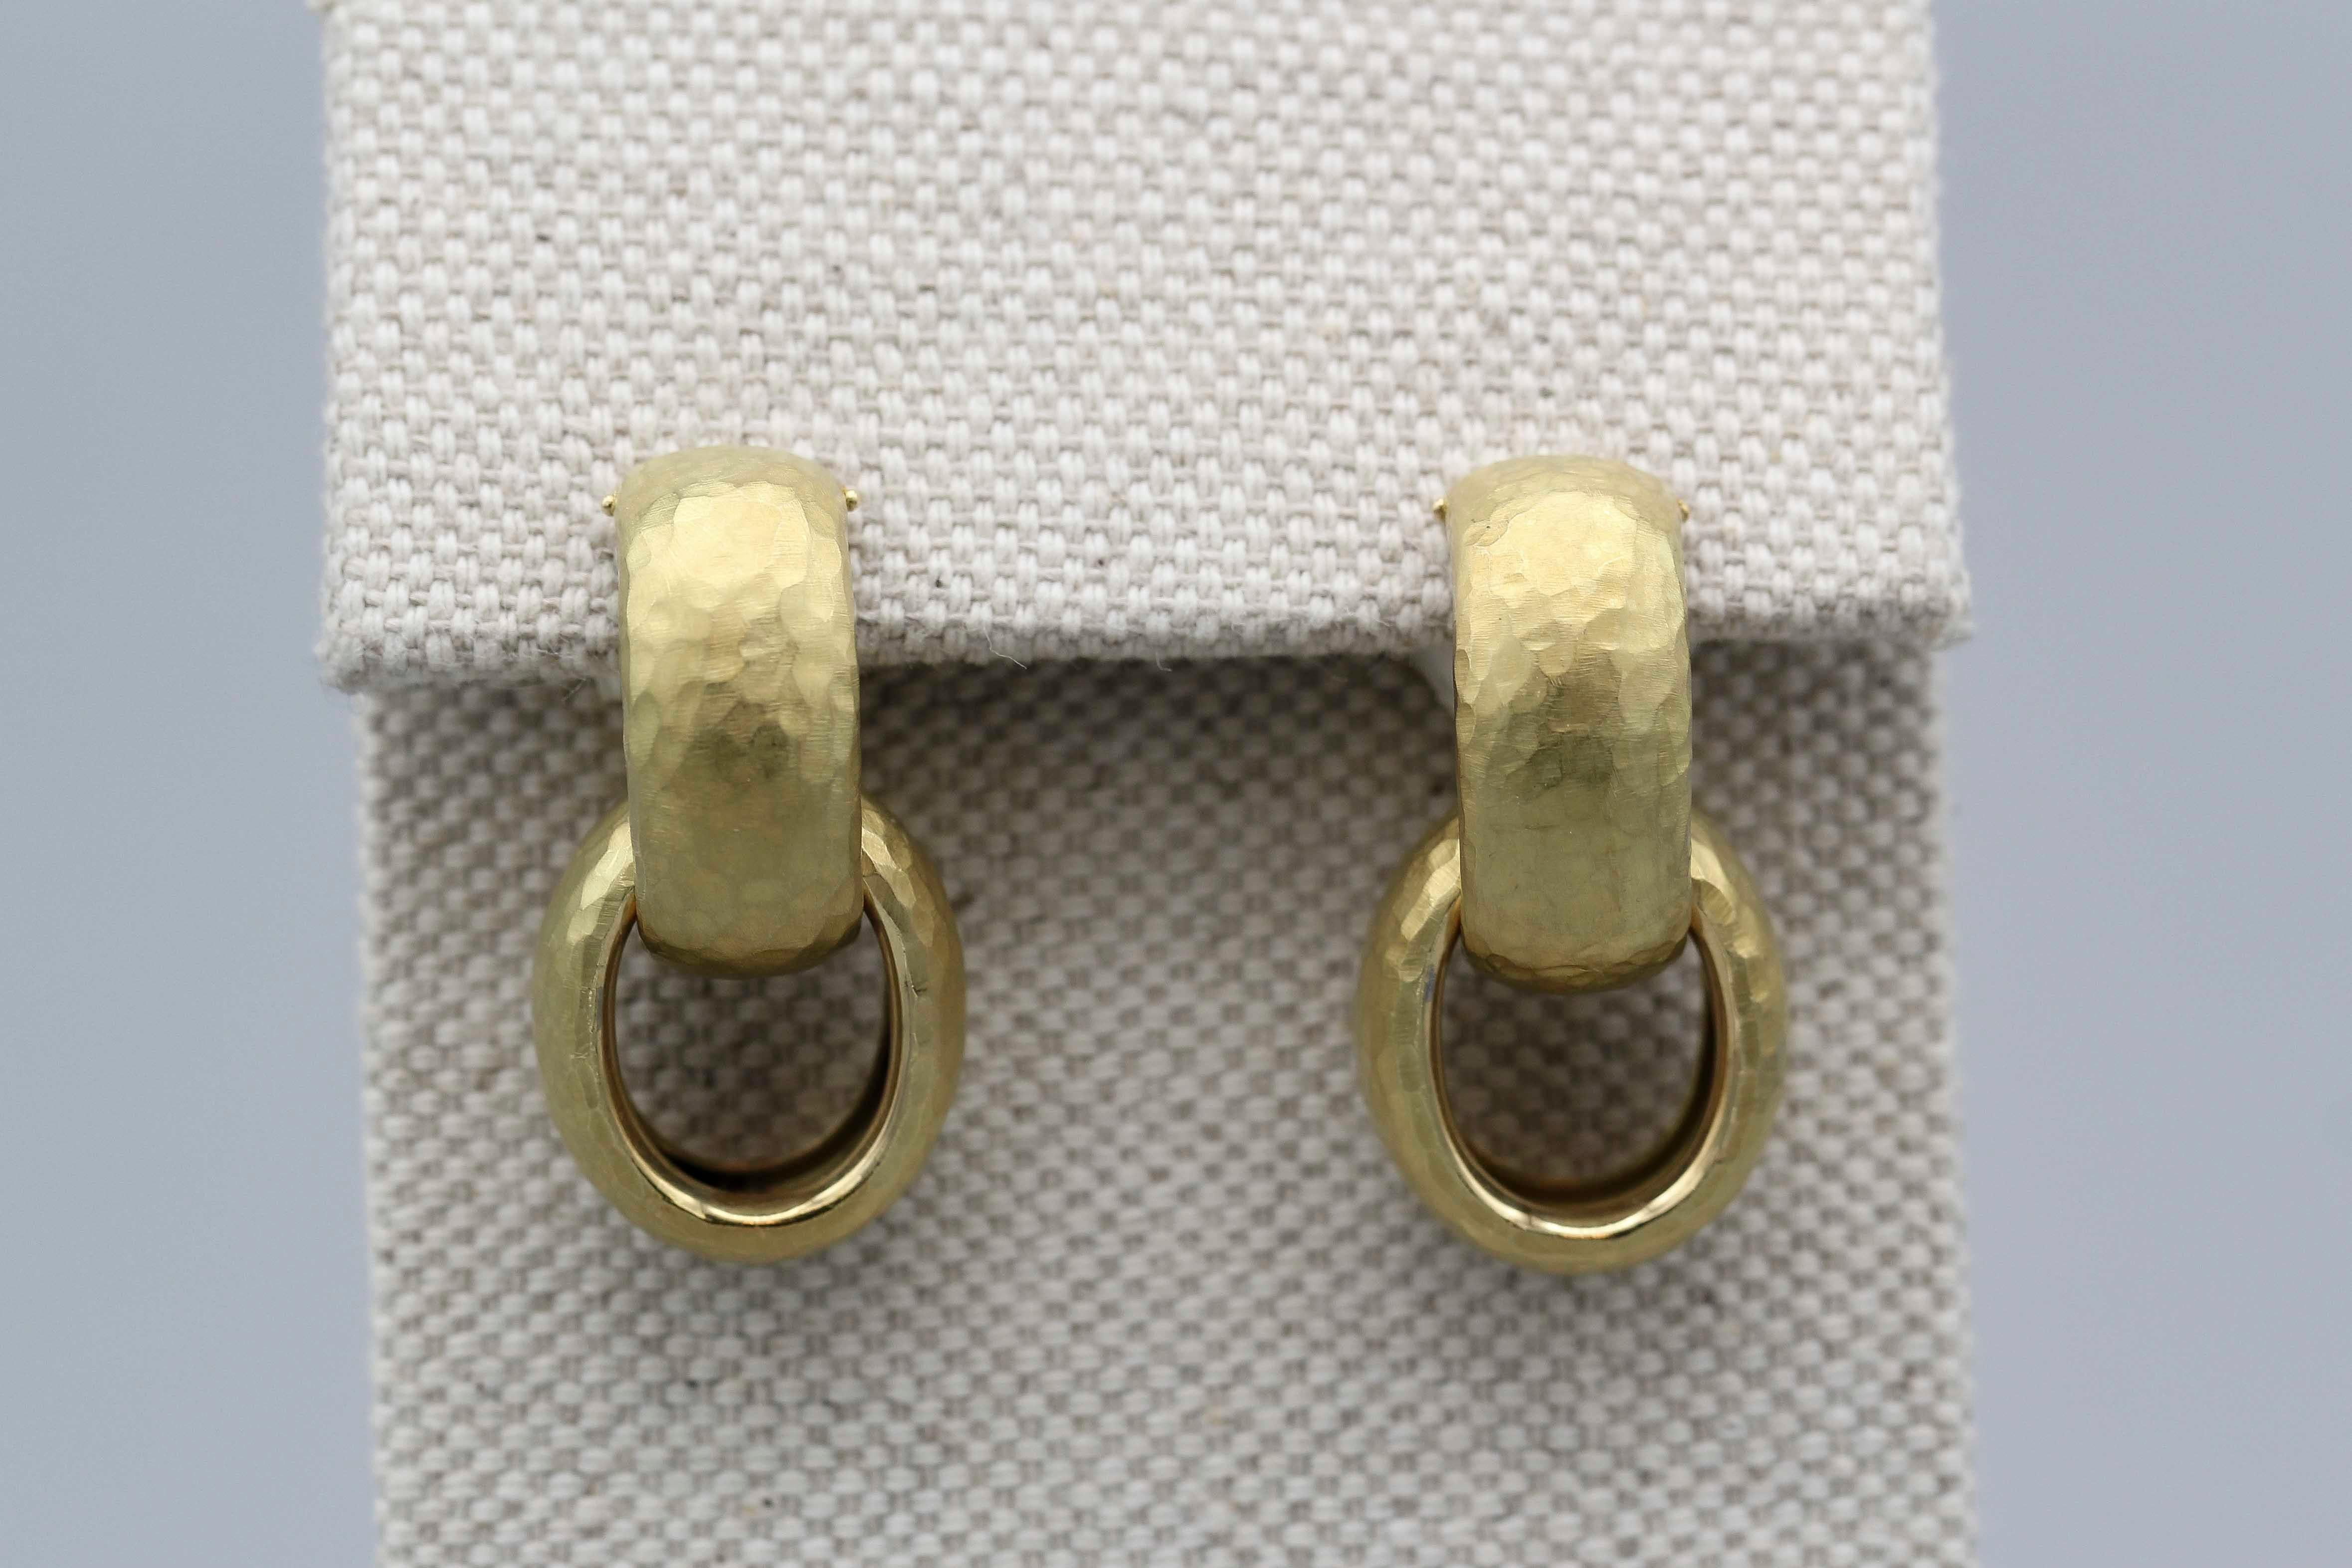 Fine pair of 18K gold drop earrings by Paloma Picasso for Tiffany & Co. They are designed as huggies with a removable link, over 1 inch in long, and feature a hammered gold design reminiscent of ancient jewelry.  Arguably the most famous design of